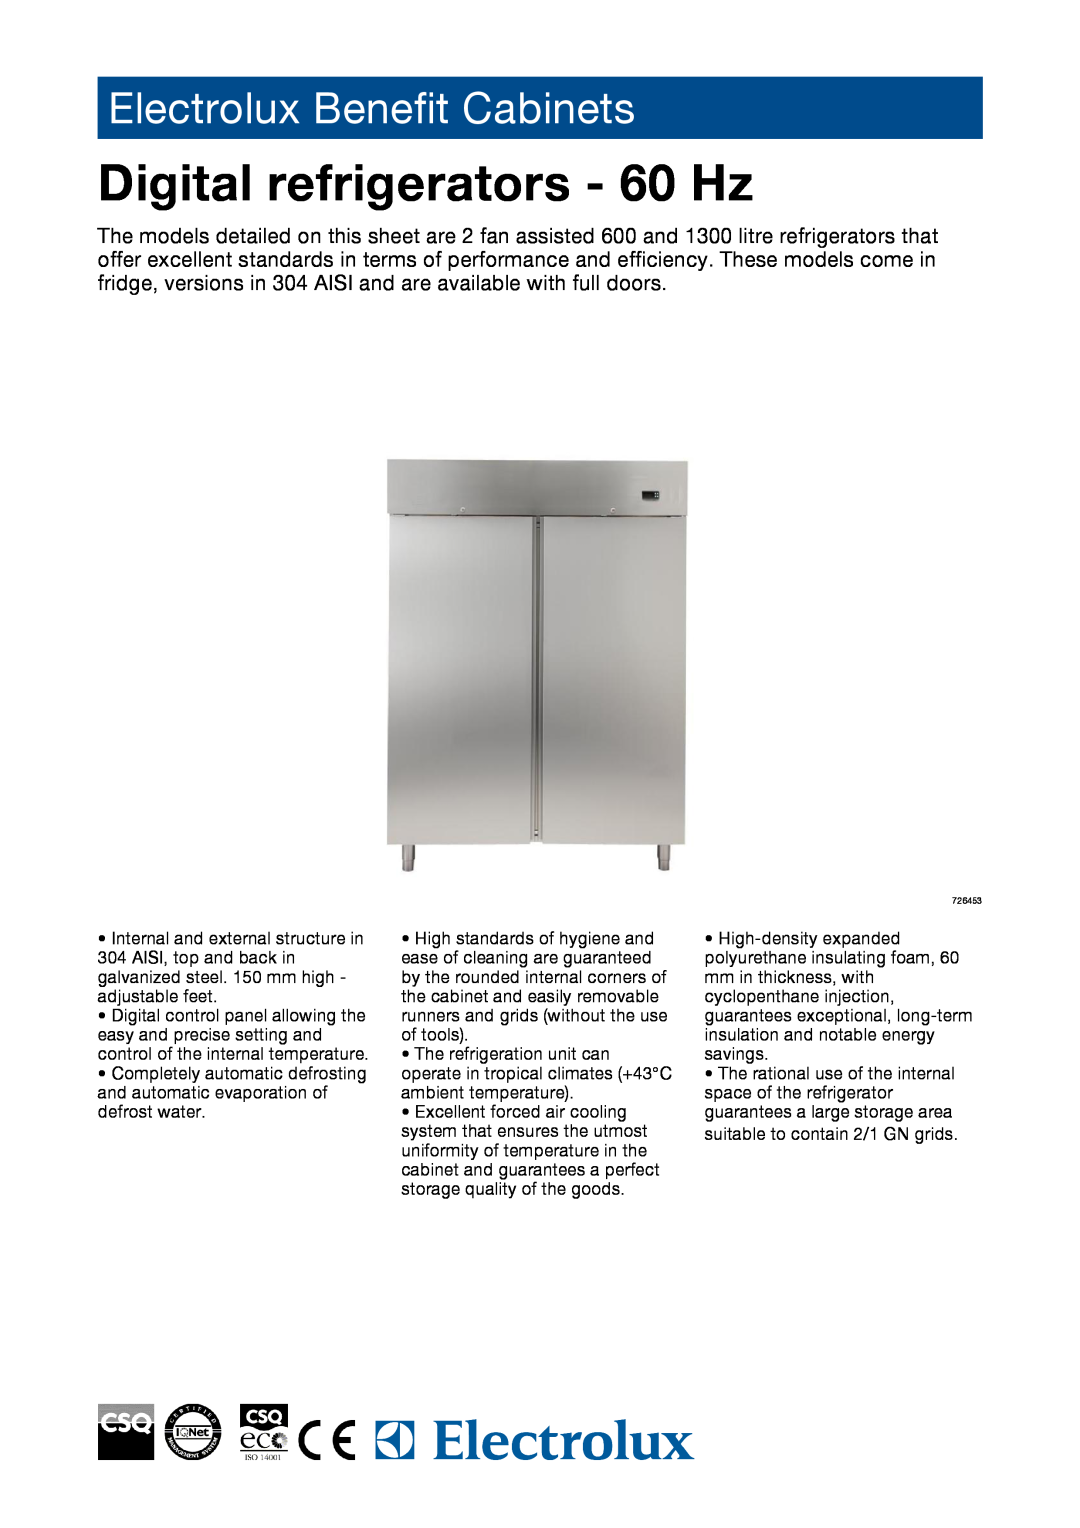 Electrolux 726461, 726453, RS06PX1F6, RS13PX2F6 manual Digital refrigerators - 60 Hz, Electrolux Benefit Cabinets 